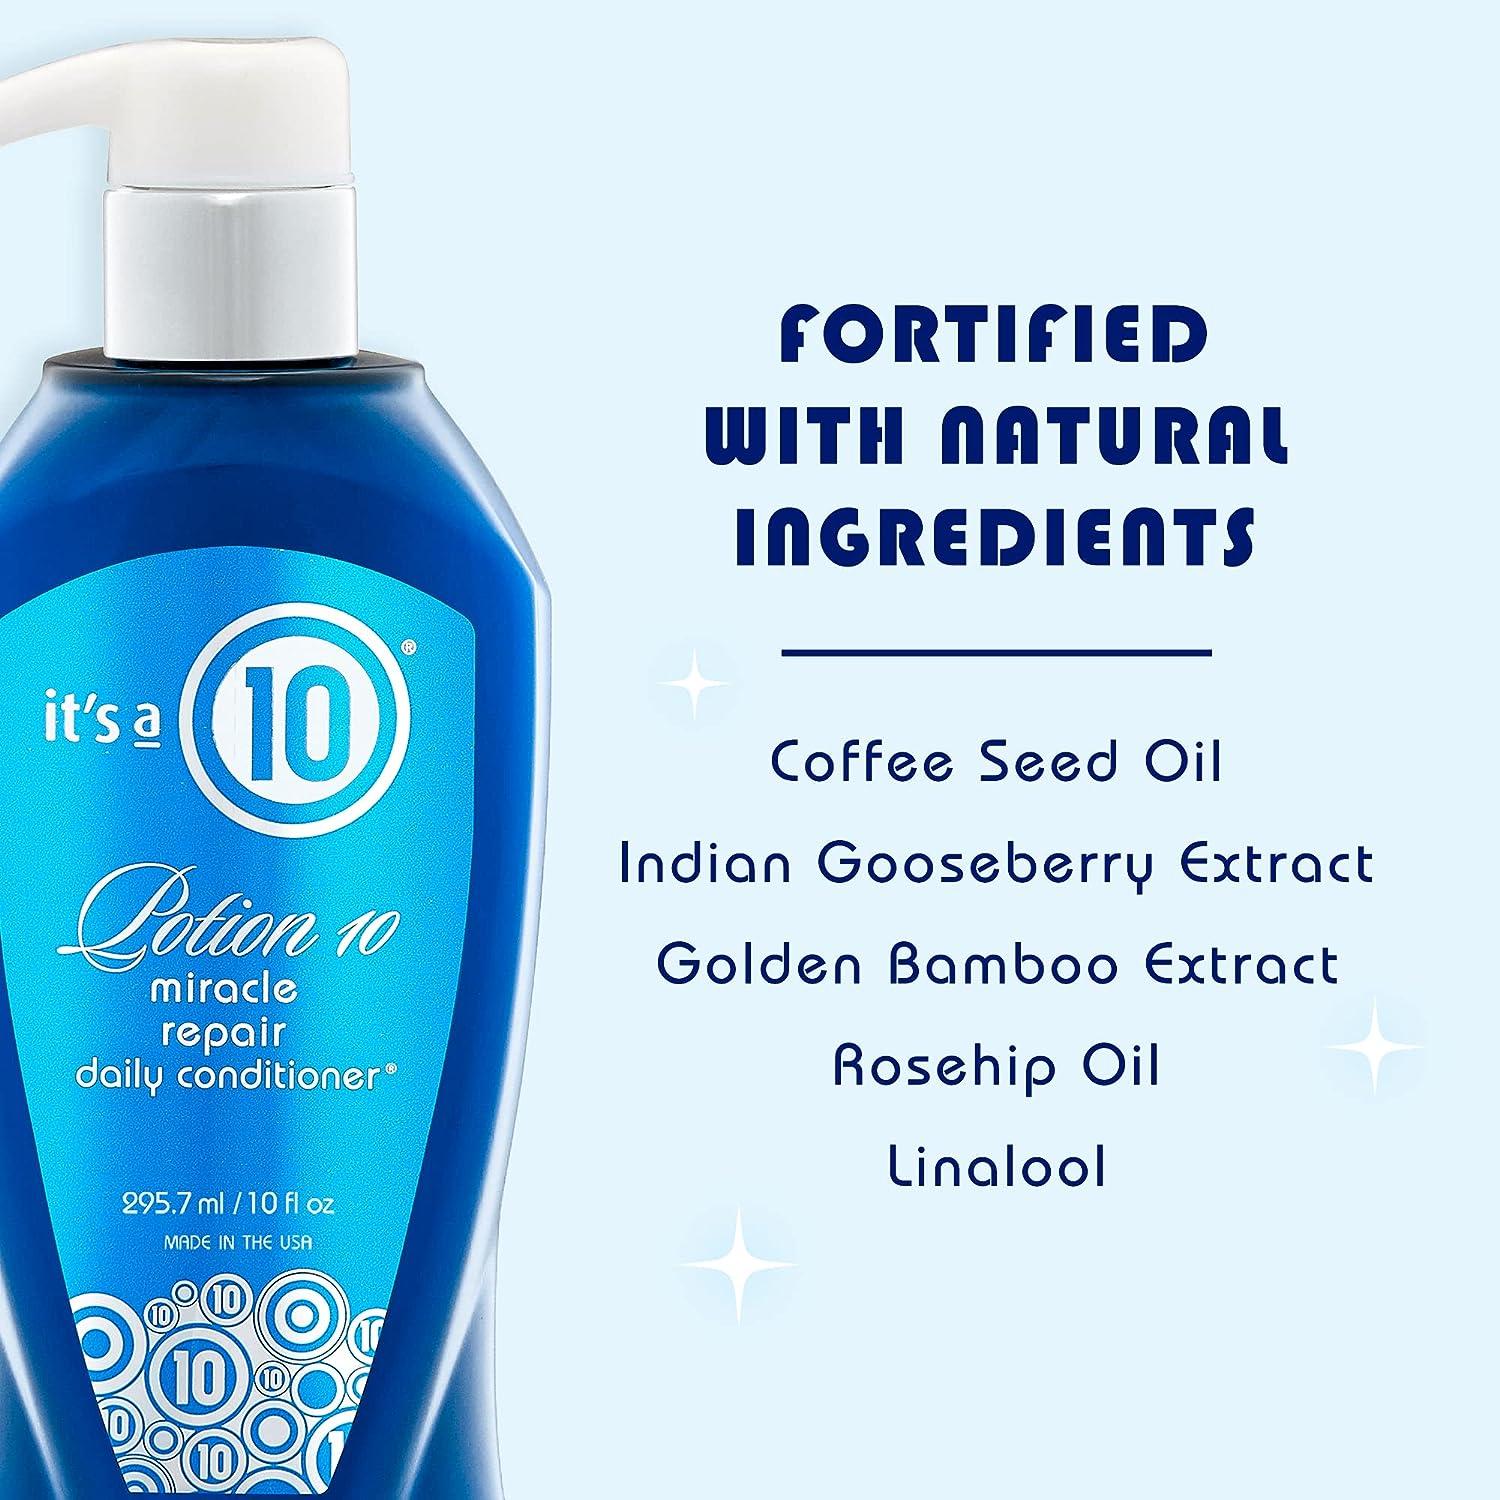 IT'S A 10! MIRACLE DAILY CONDITIONER